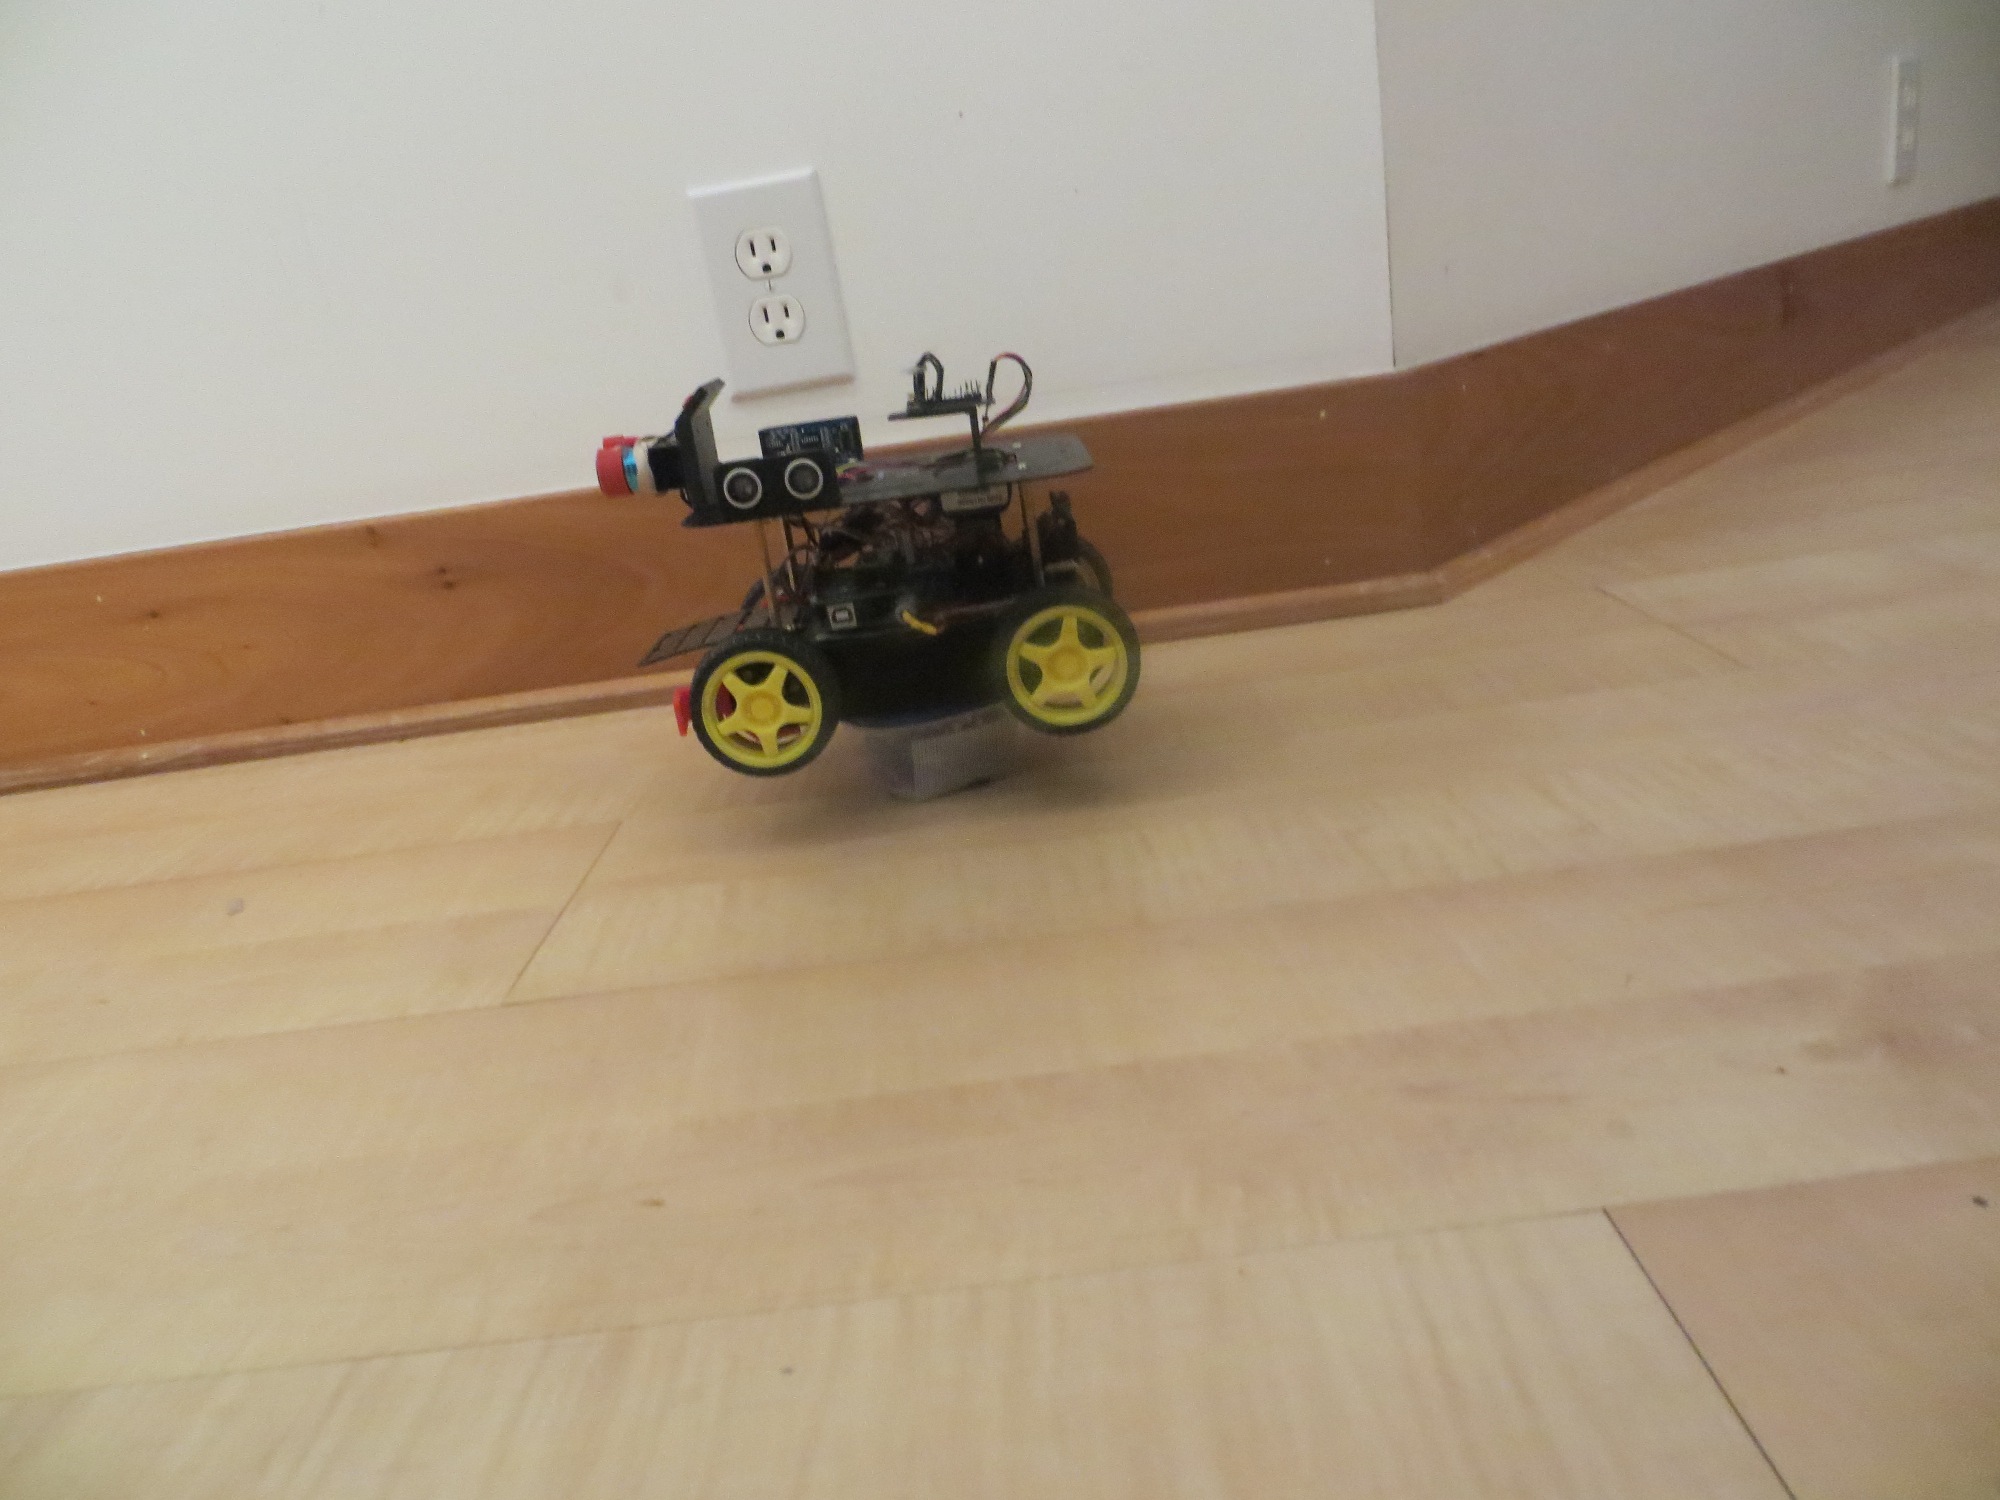 Wall-E2 on a pedestal so motors can run normally without moving the robot